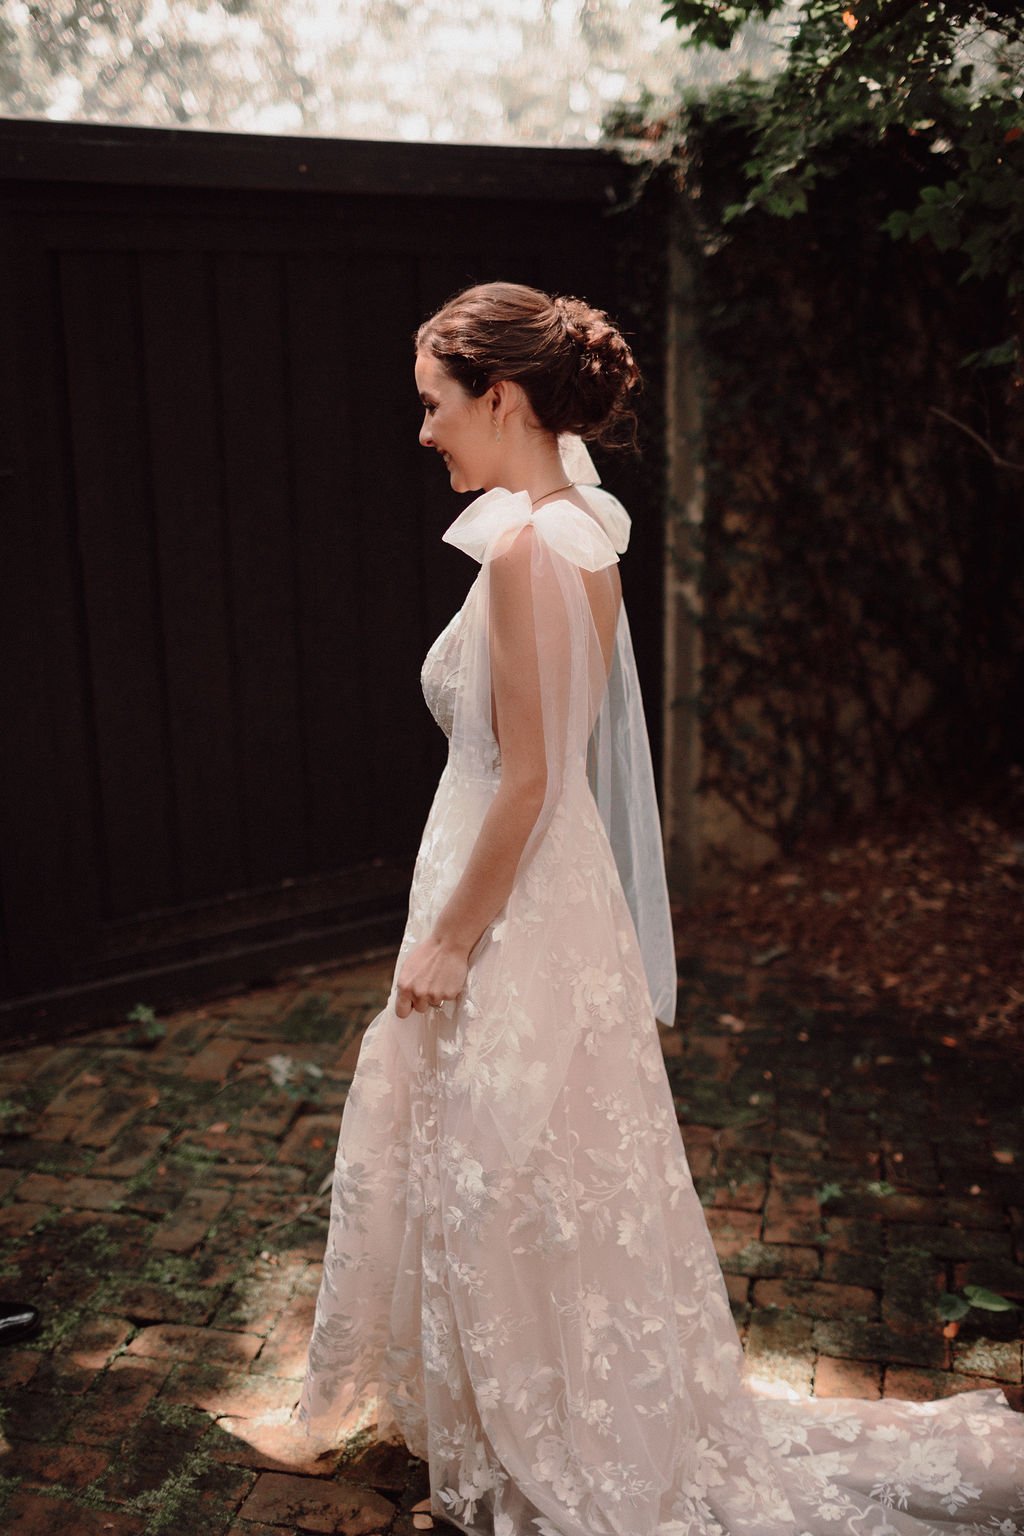 anna-in-the-elsie-gown-by-made-with-love-a-flowy-romantic-modern-lace-wedding-gown-purchased-from-savannah-bridal-shop-ivory-and-beau-2.jpg